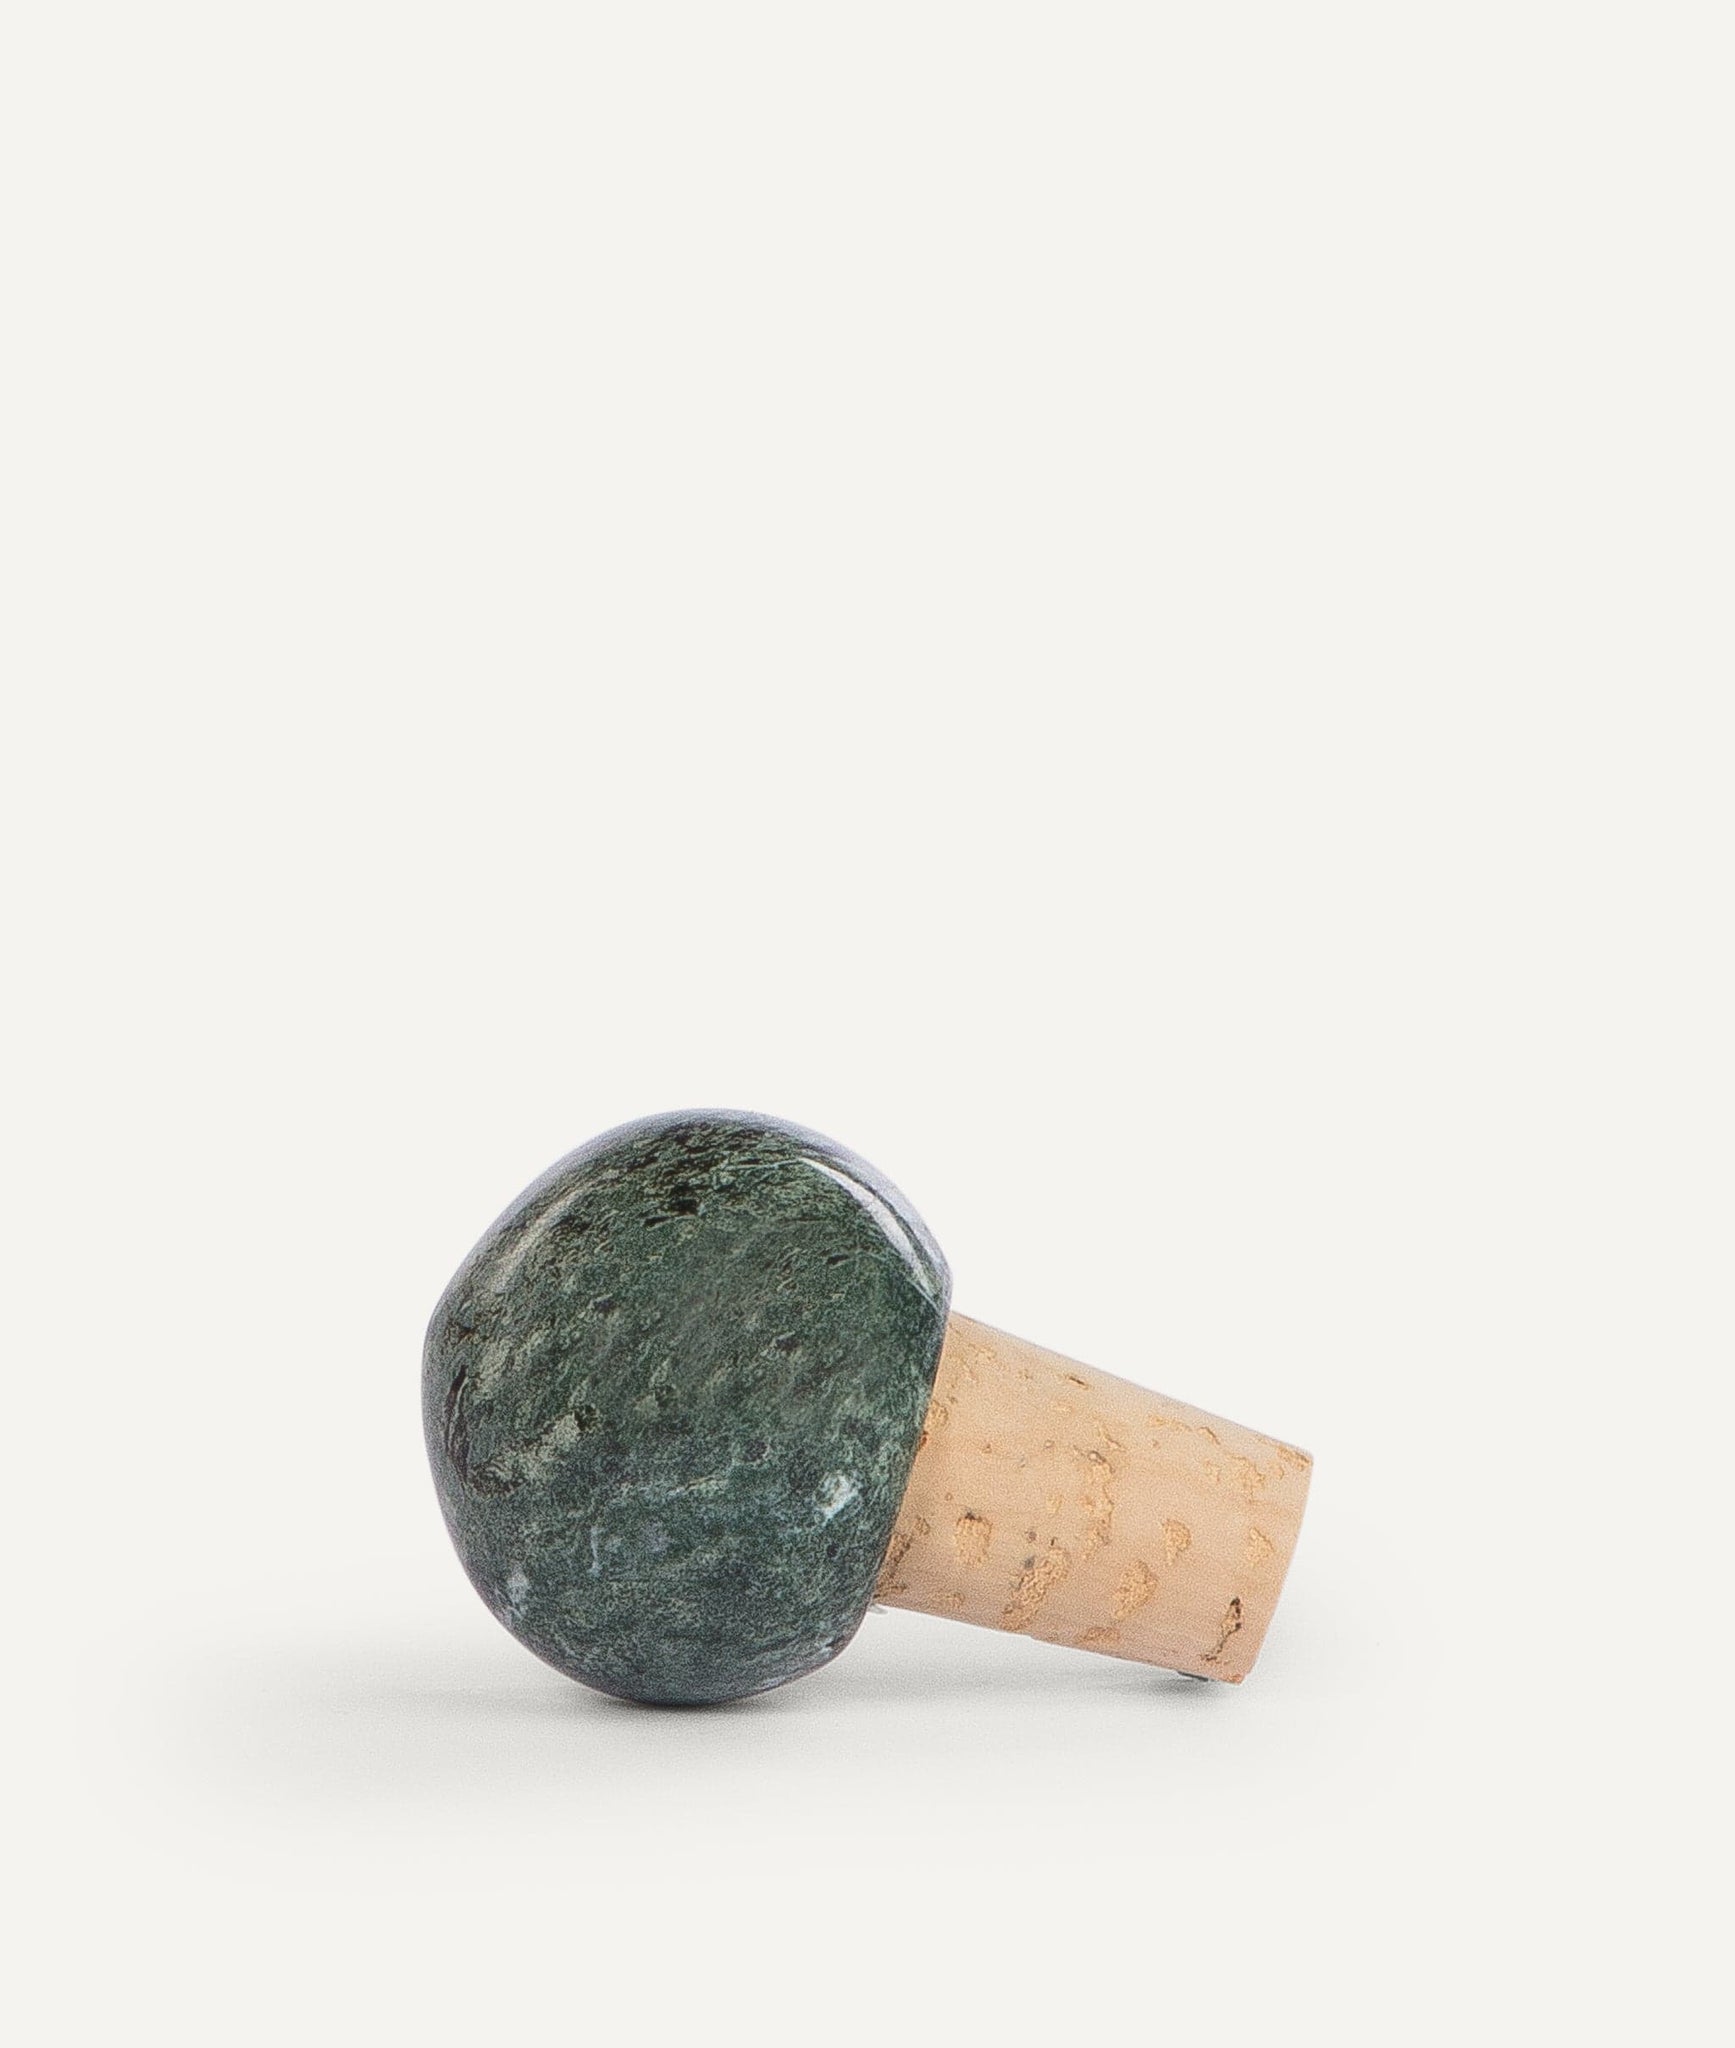 Wine Stopper in Marble and Cork